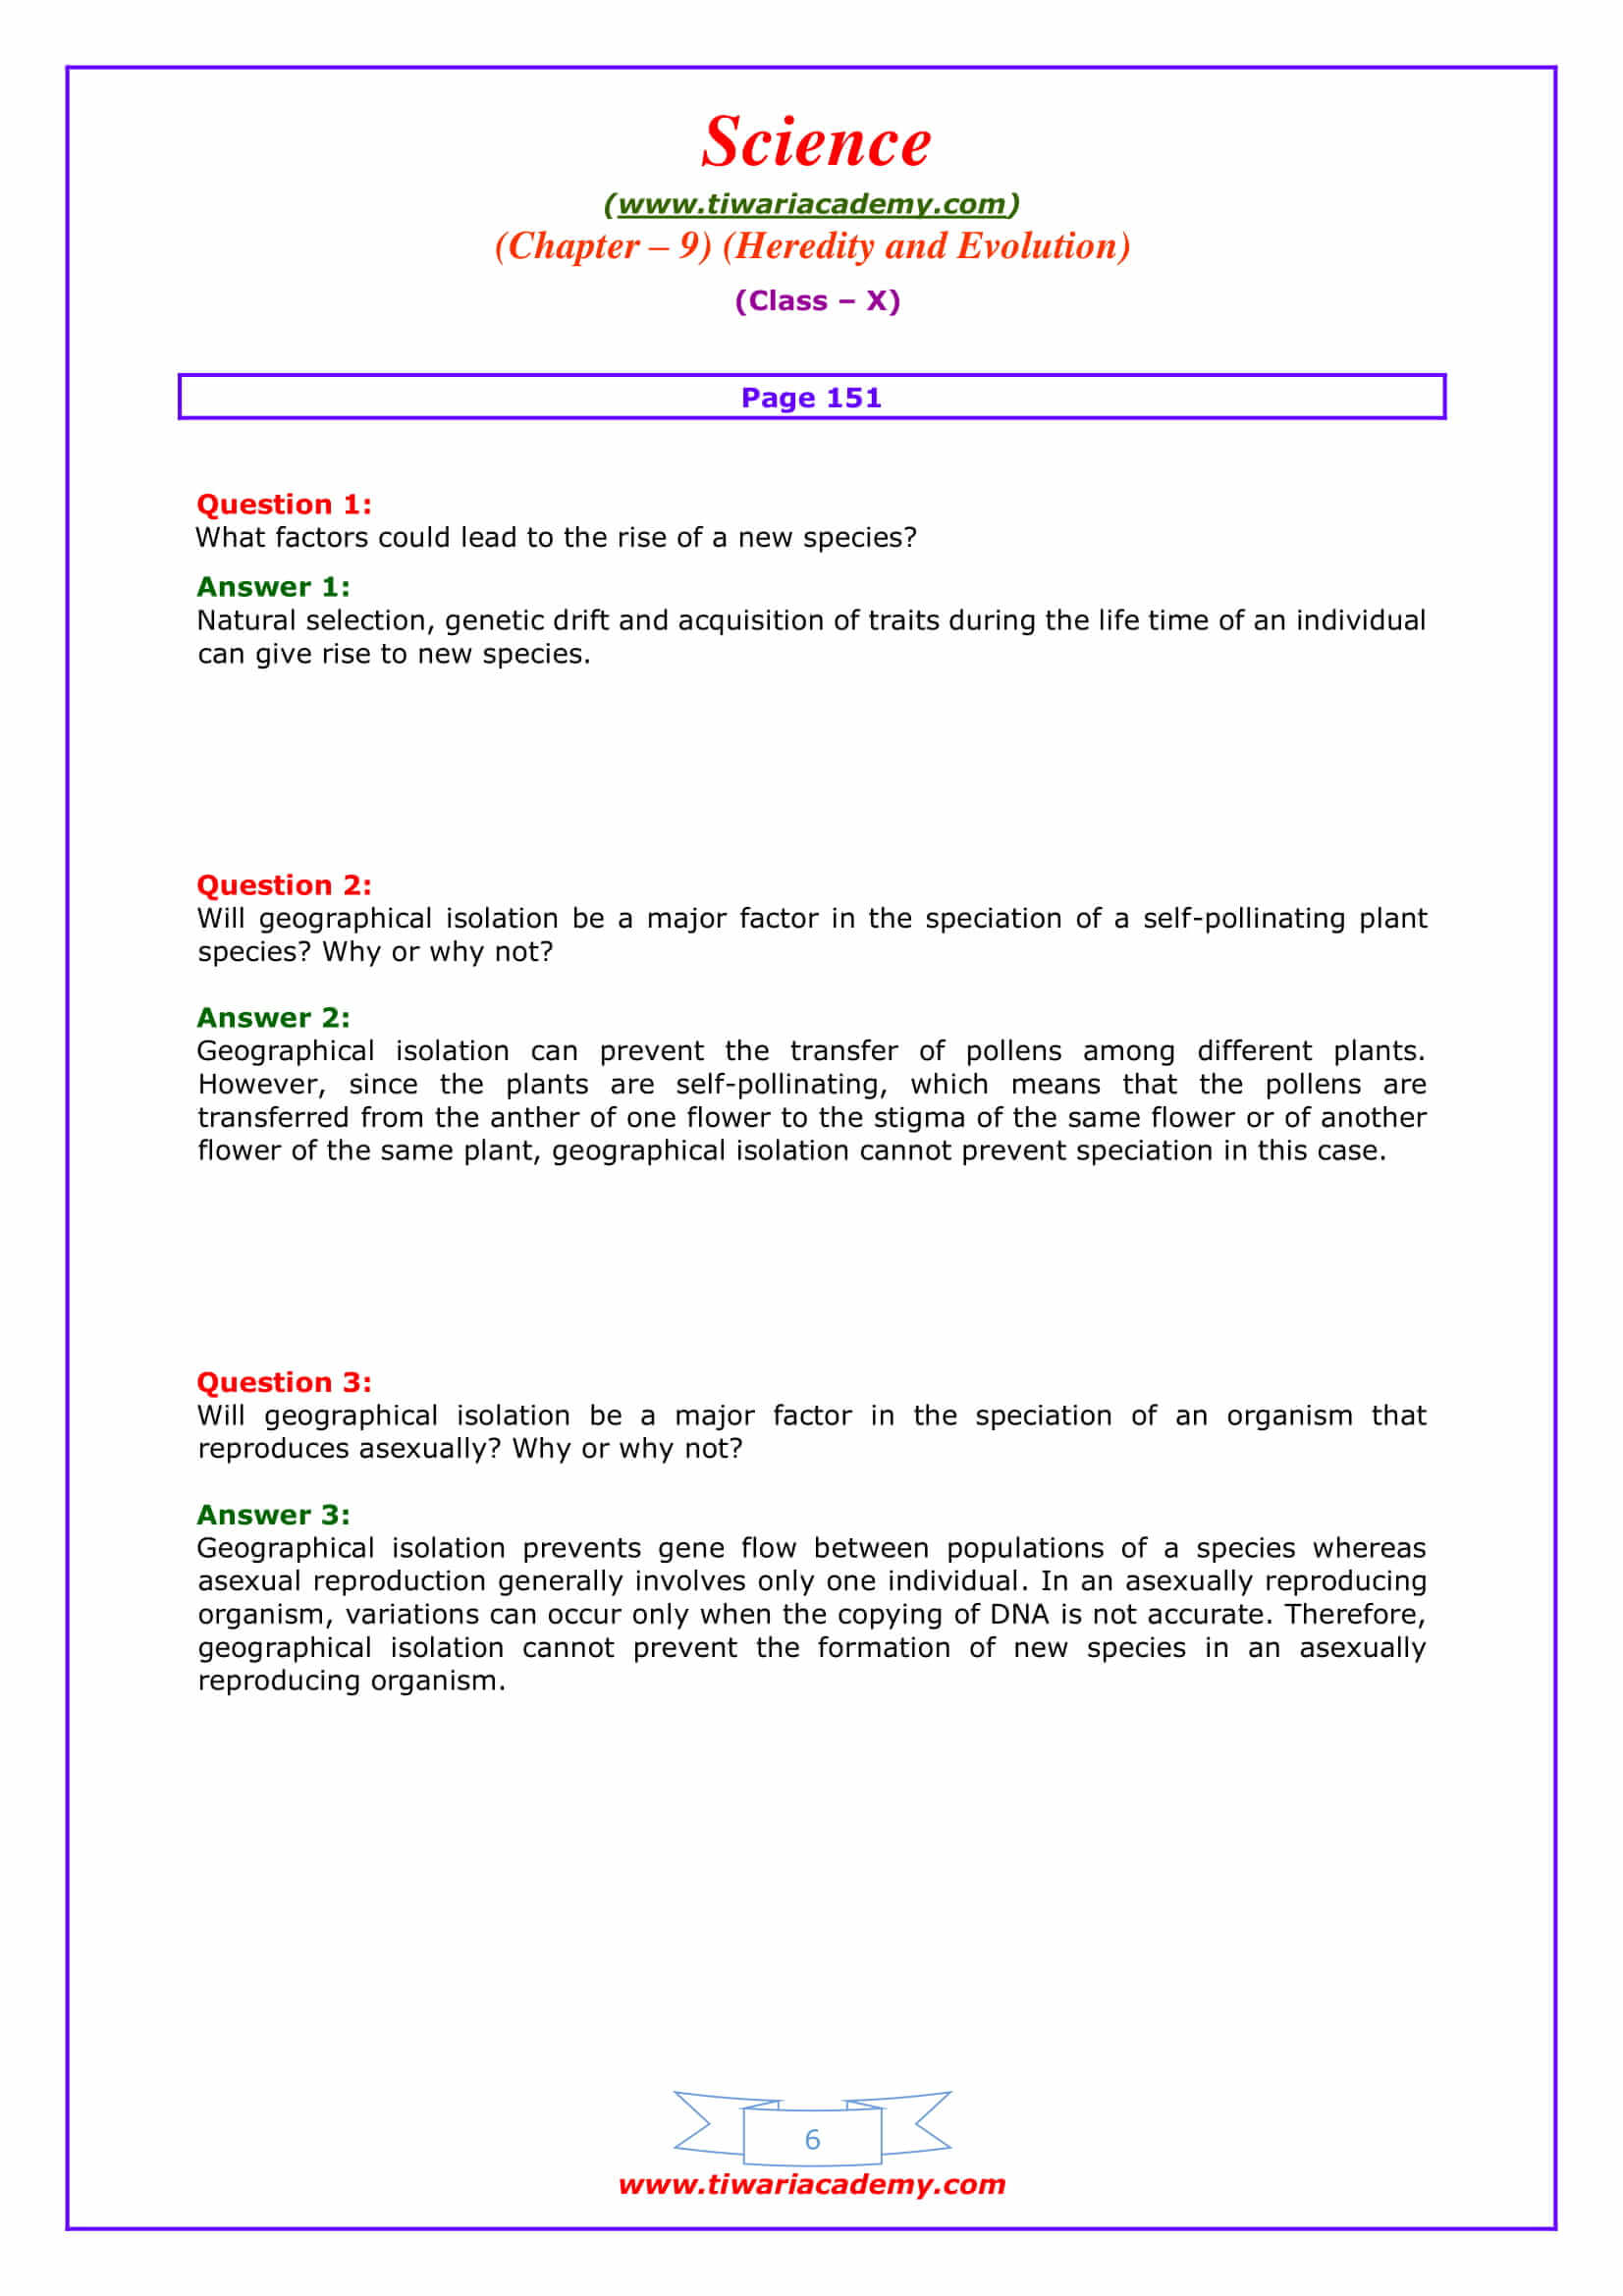 NCERT Solutions for Class 10 Science Chapter 9 Heredity and Evolution Intext questions on page 151